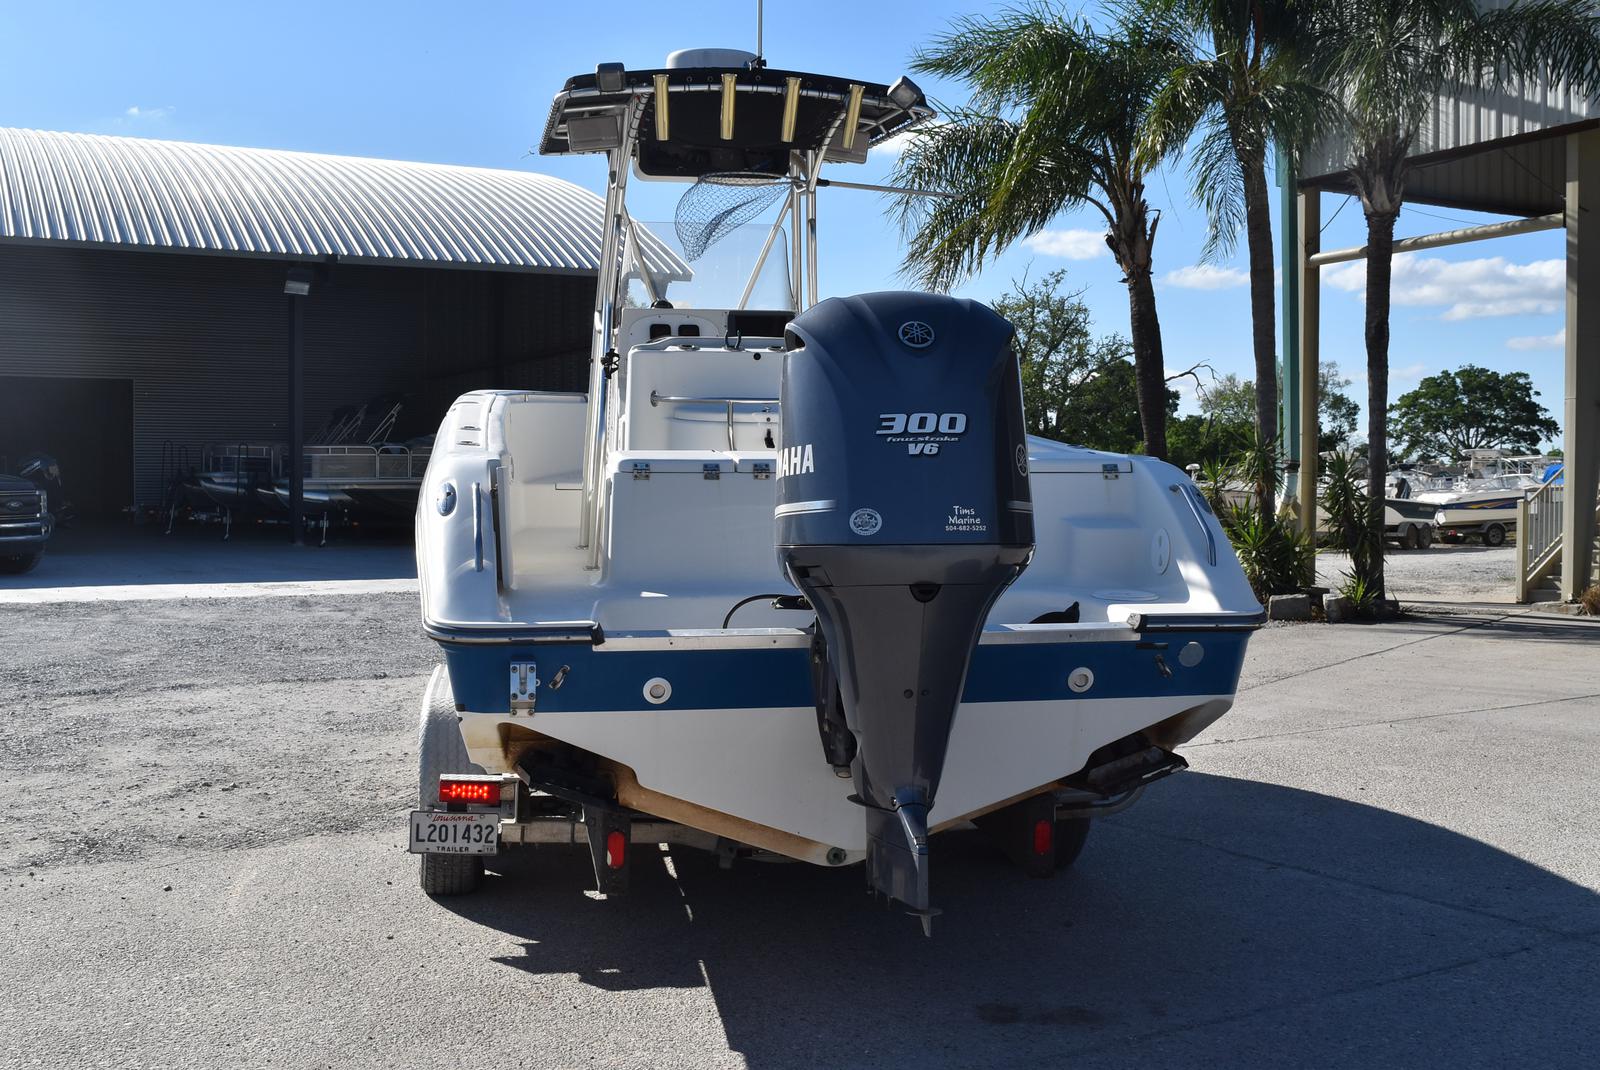 2006 Triton boat for sale, model of the boat is 2486 & Image # 2 of 24